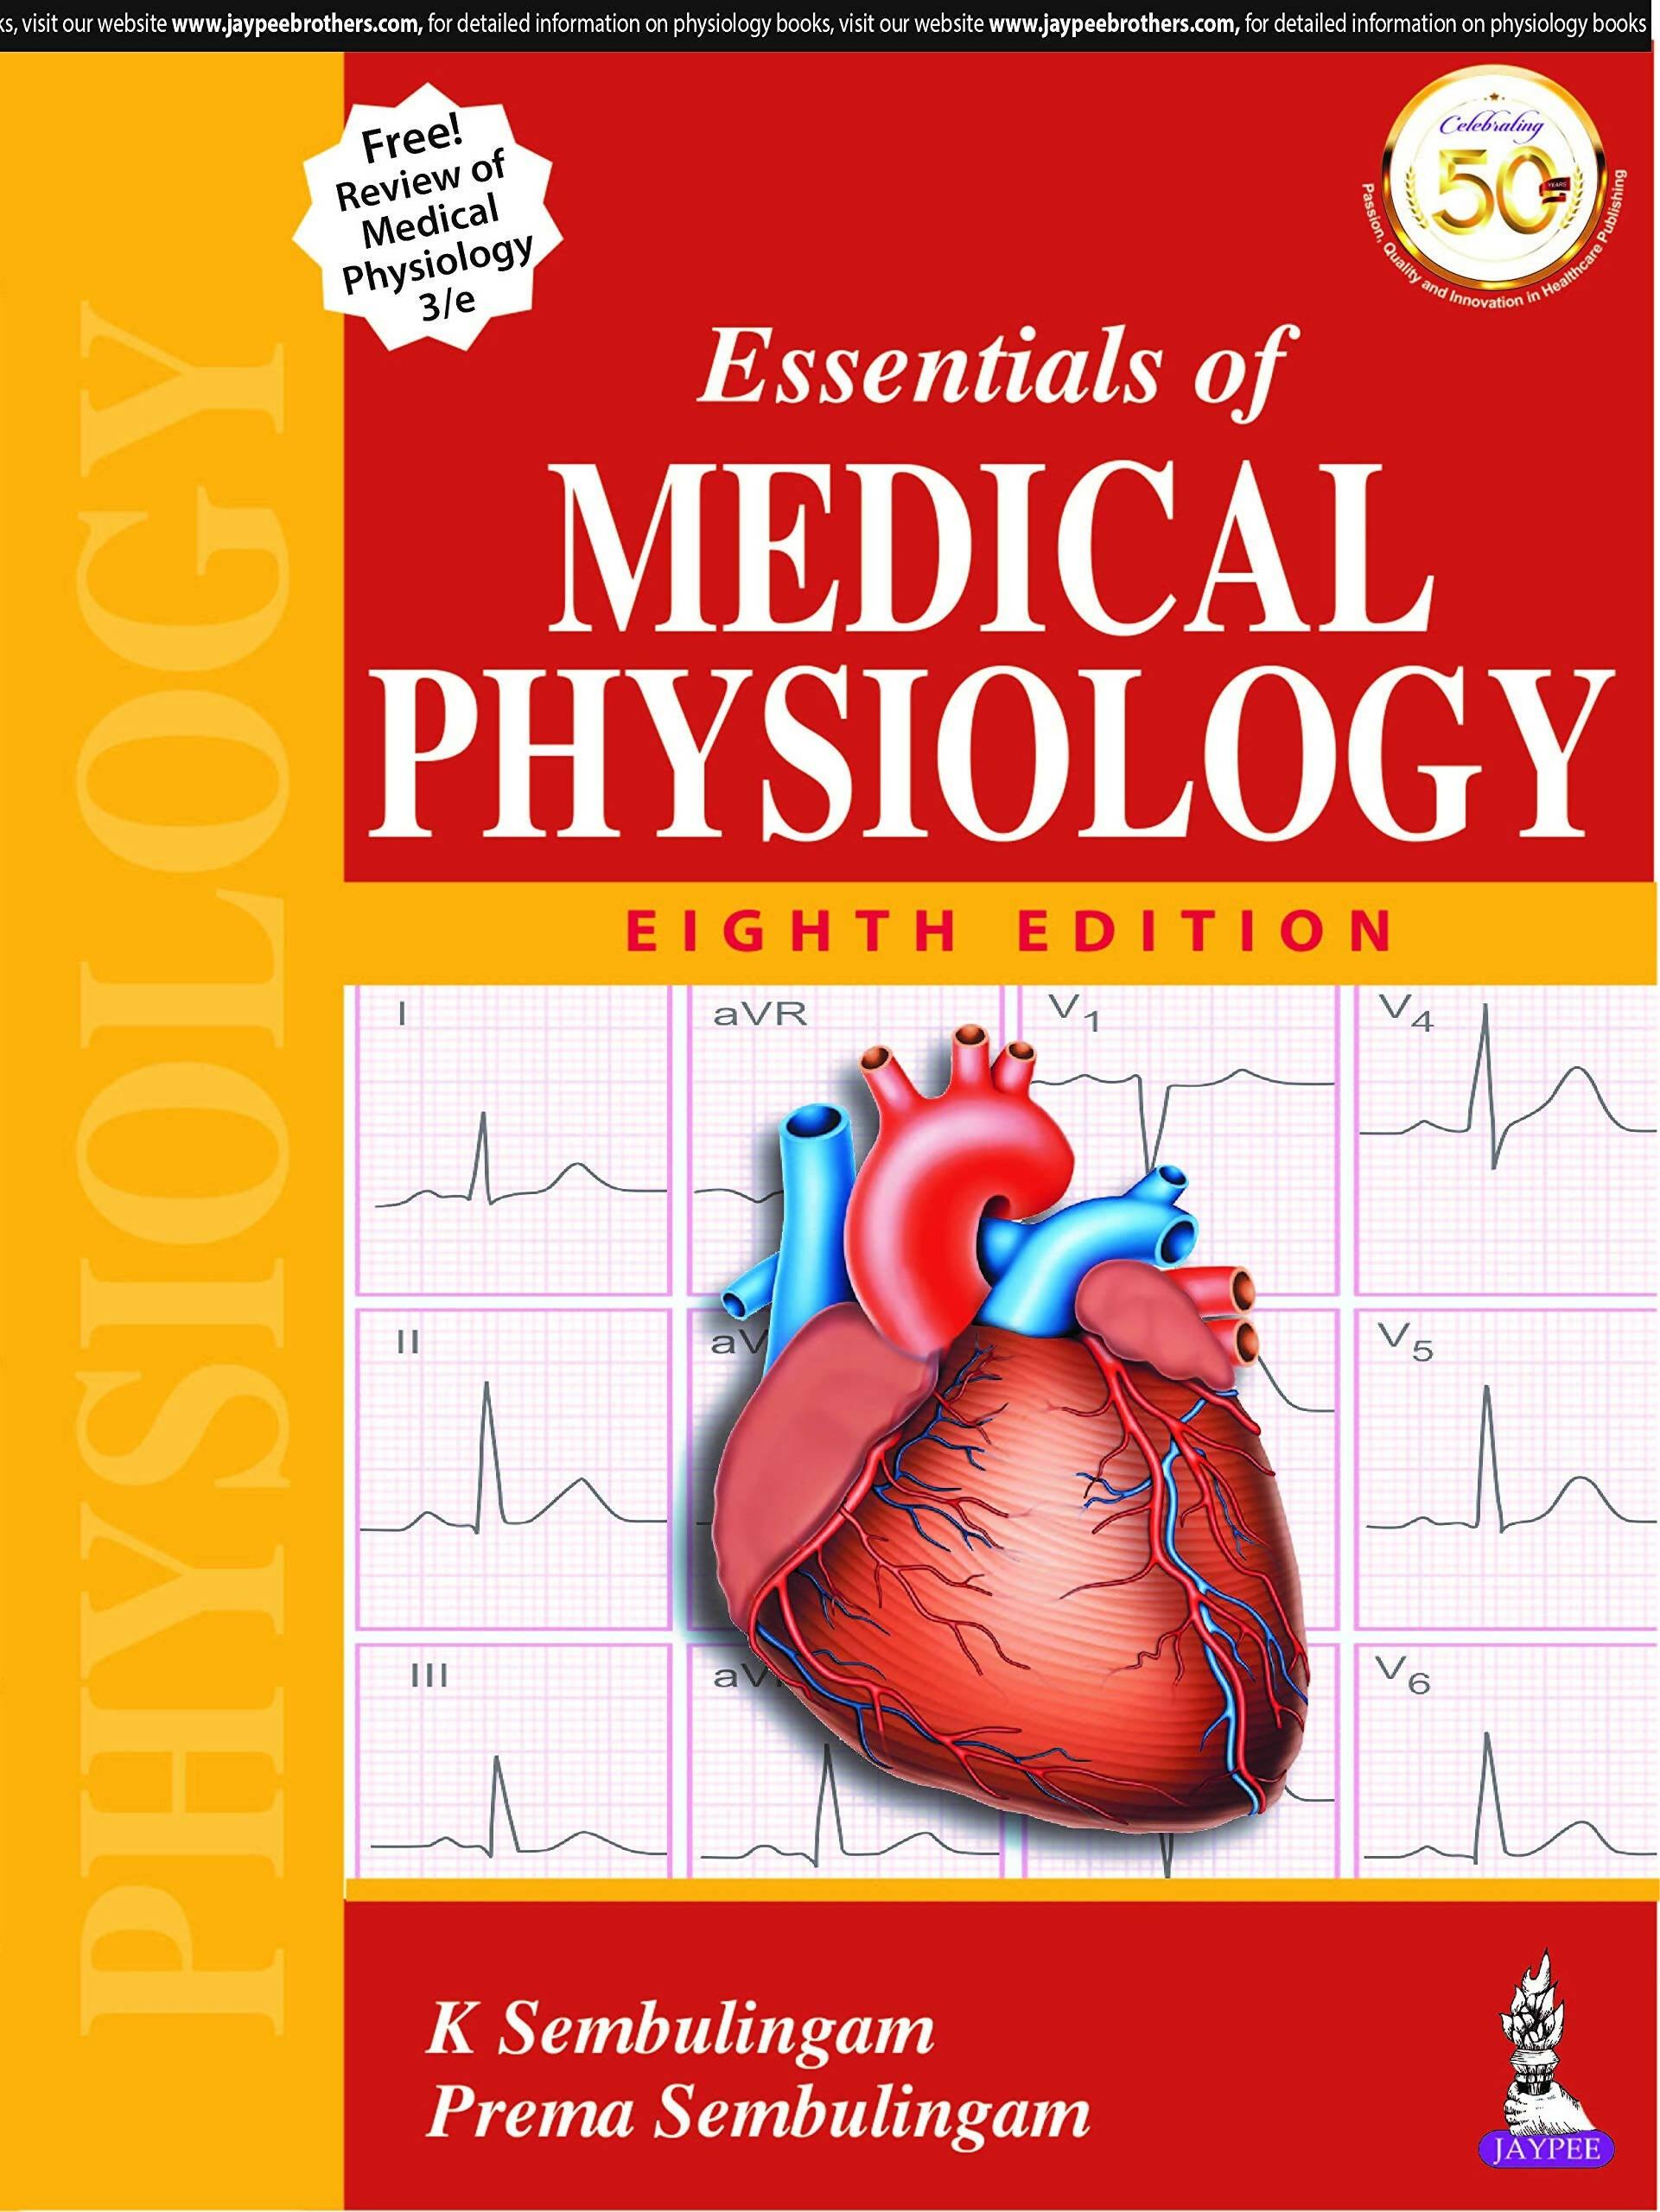 Essentials of Medical Physiology 9TH EDITION (JAYPEE) - ValueBox